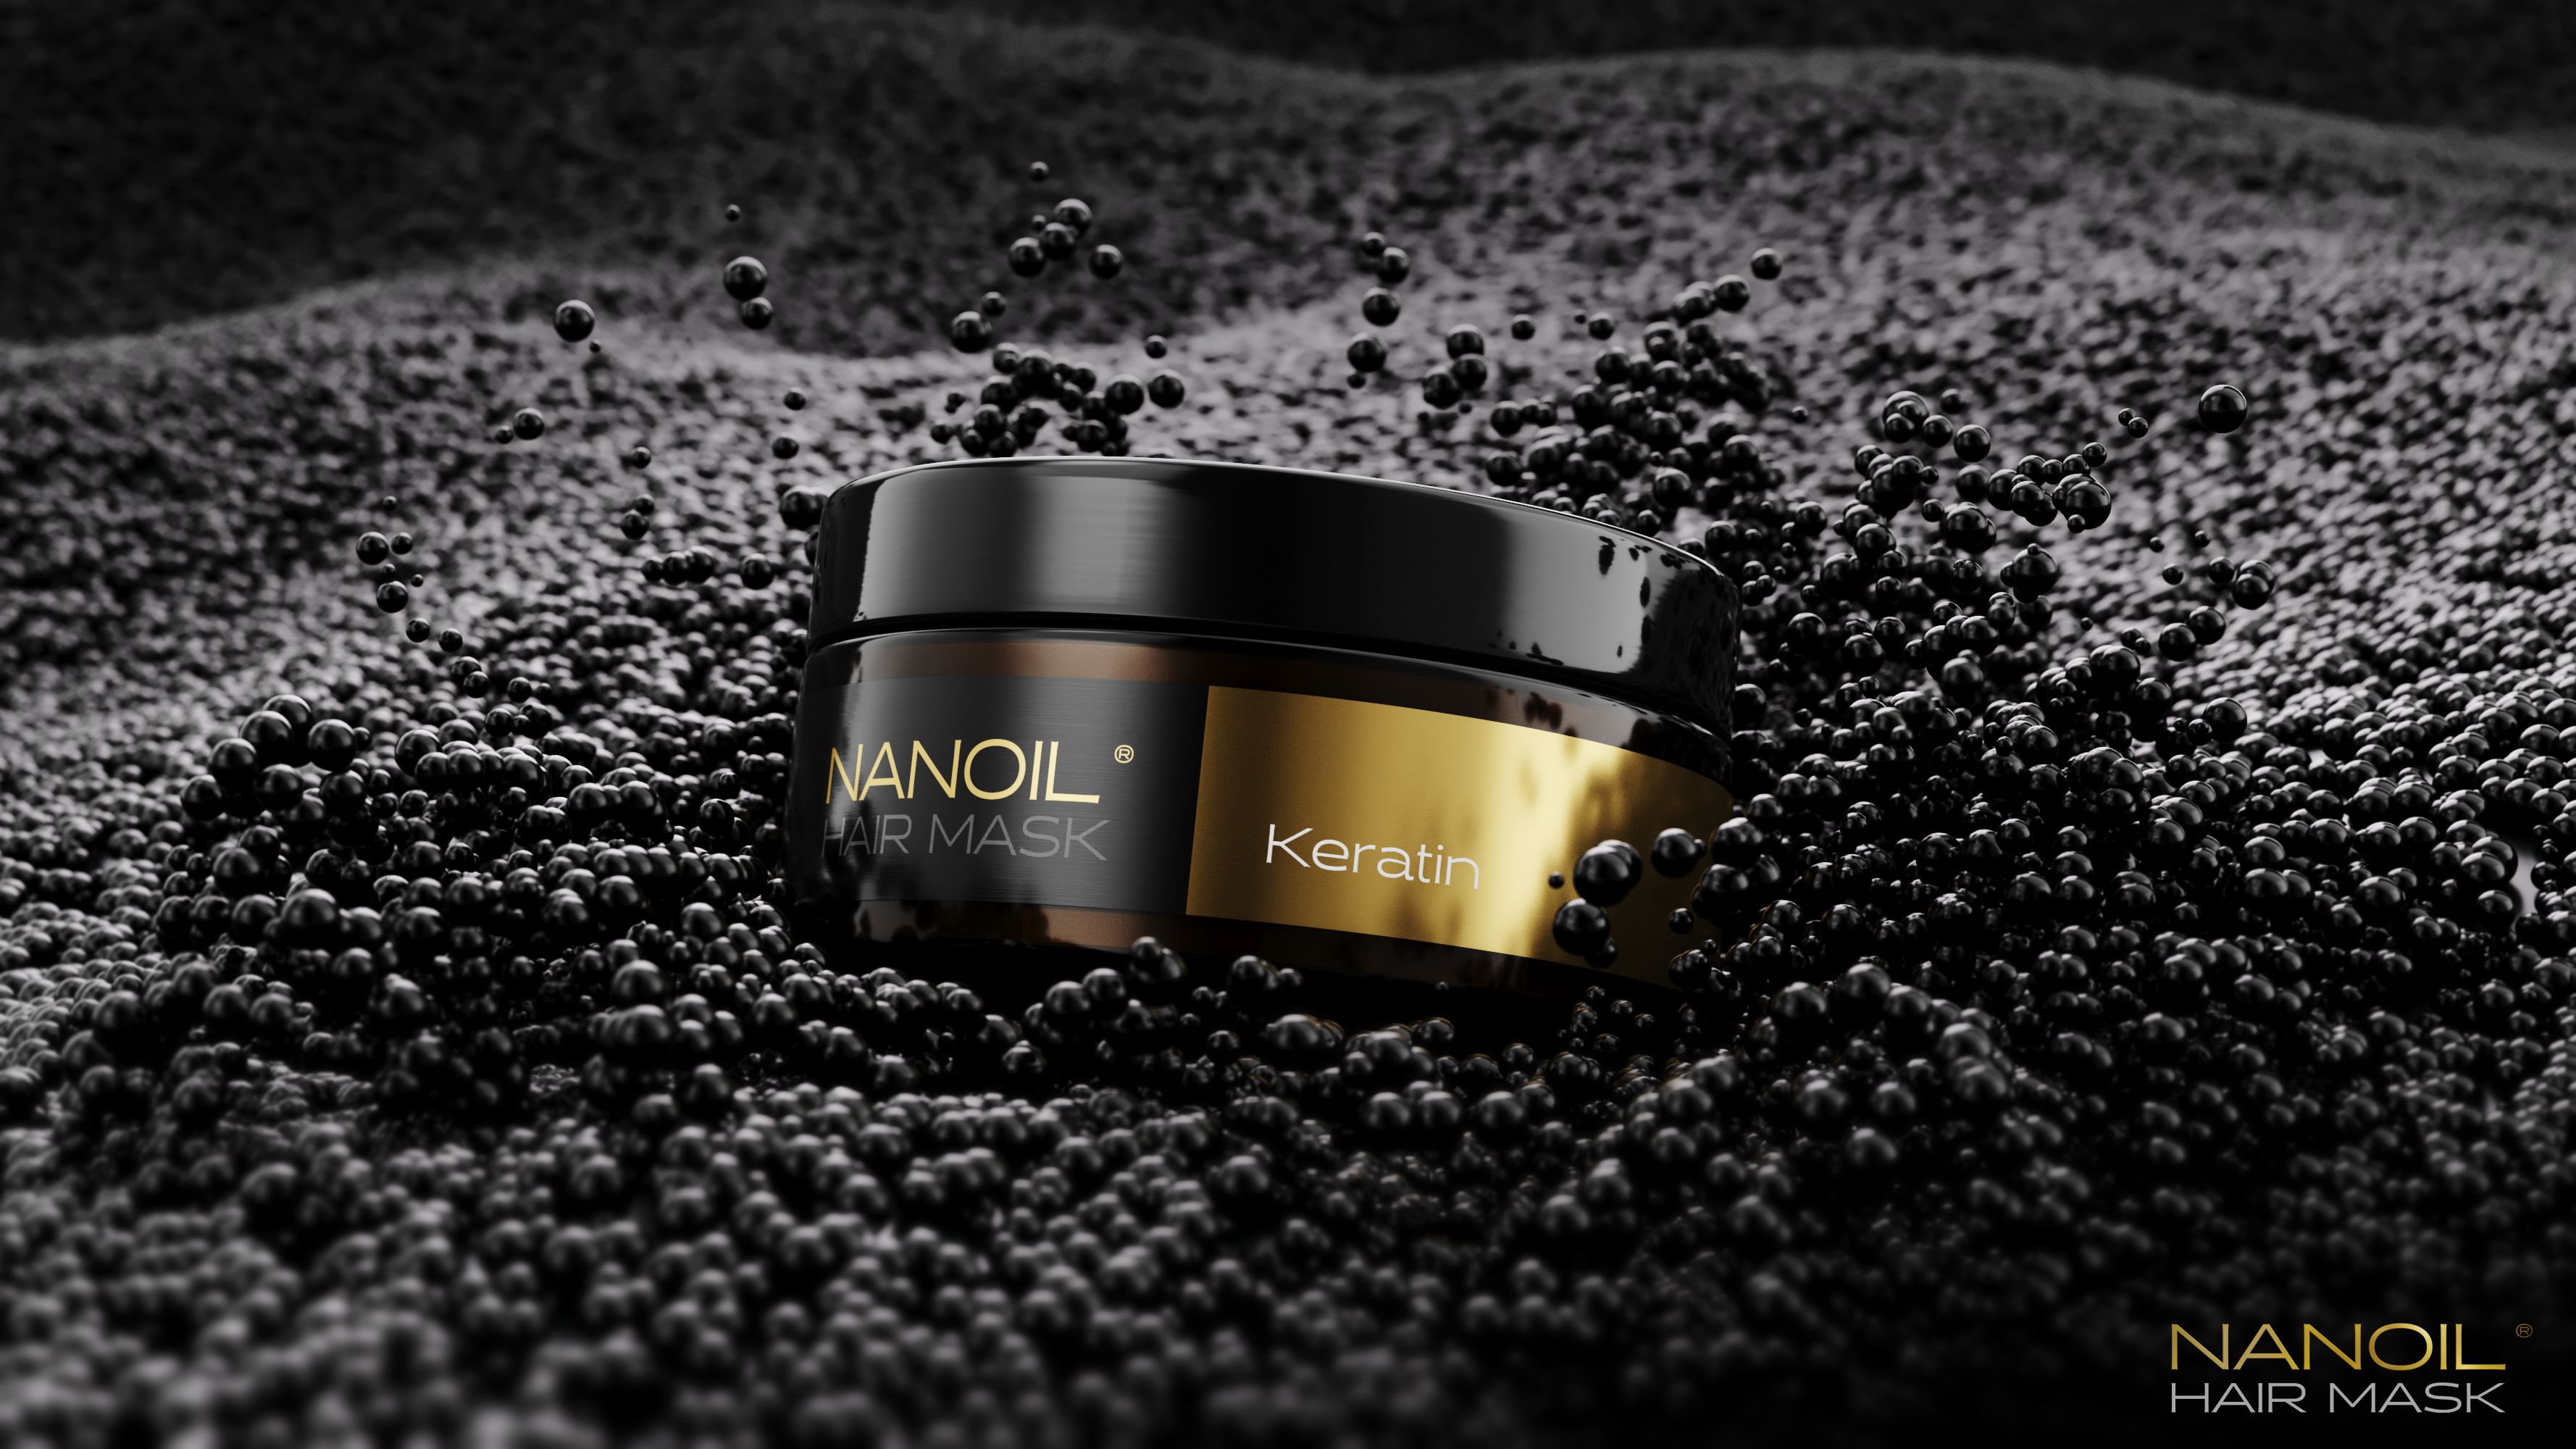 Nanoil the best hair masks with keratin